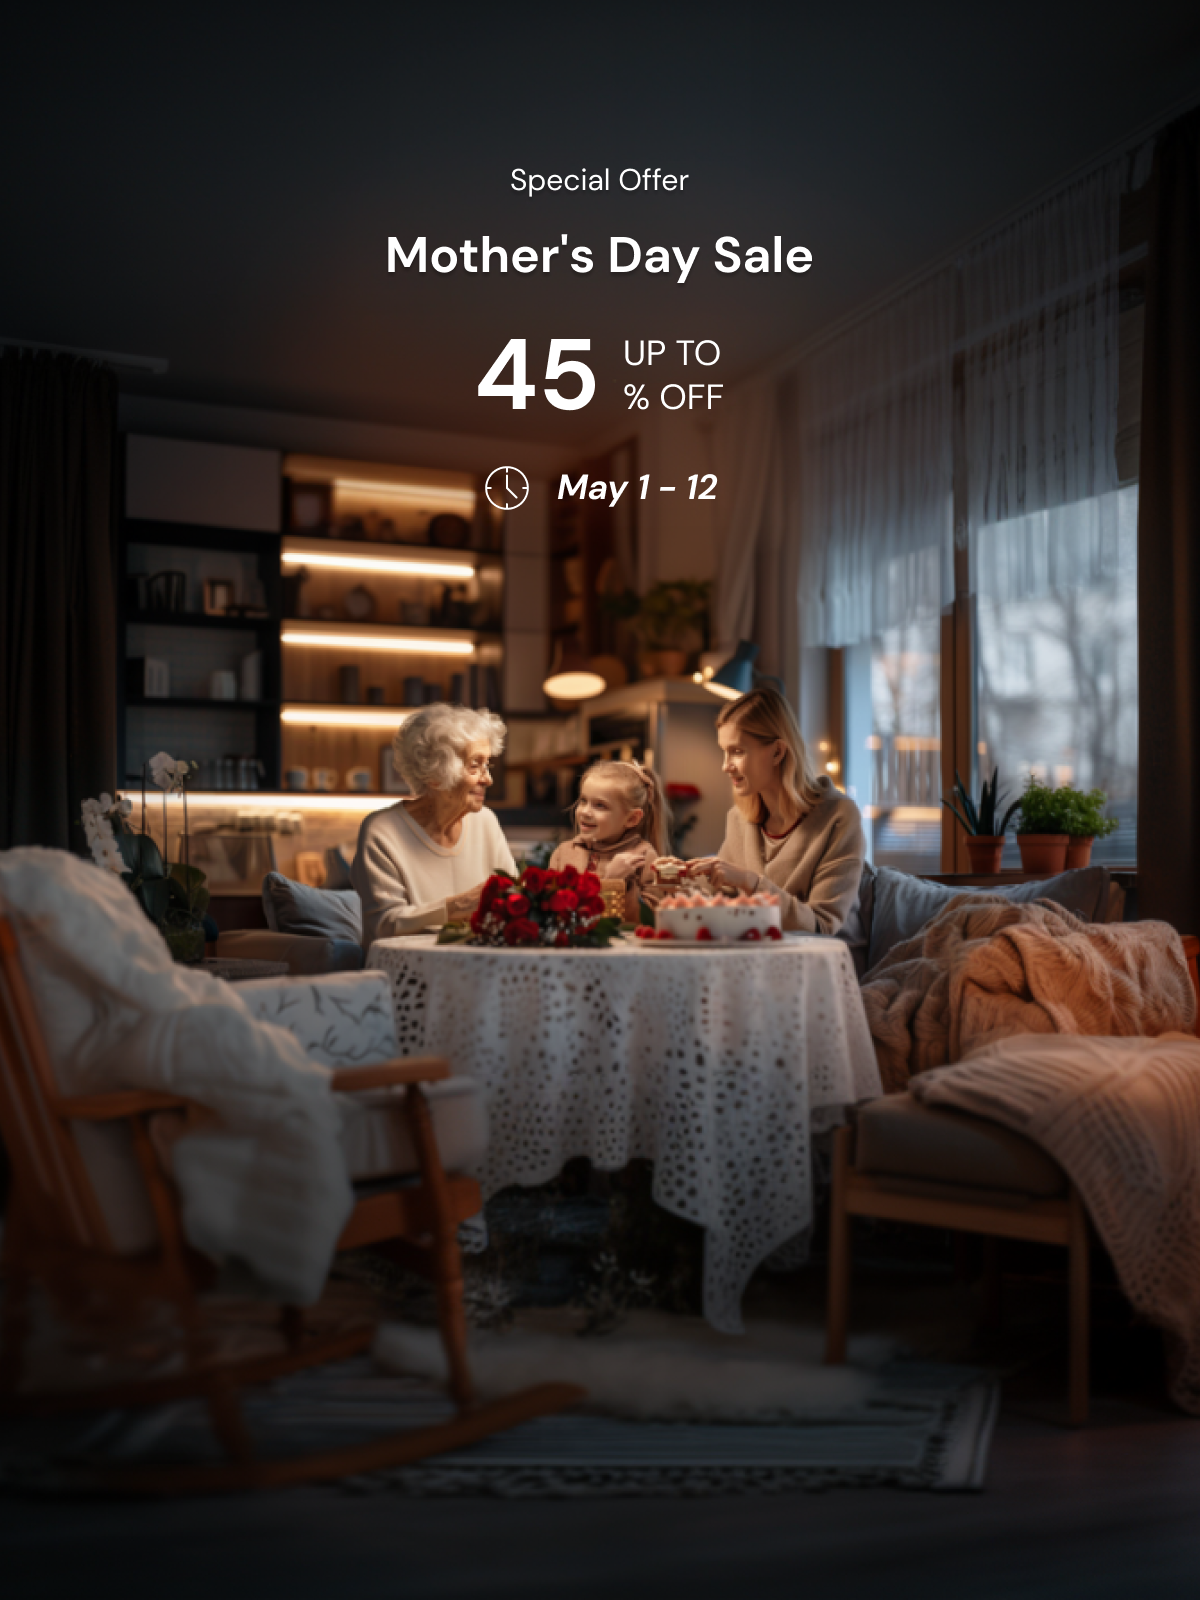 Sengled Mother's Day Sale: Up to 45% Off! Valid May 1-12